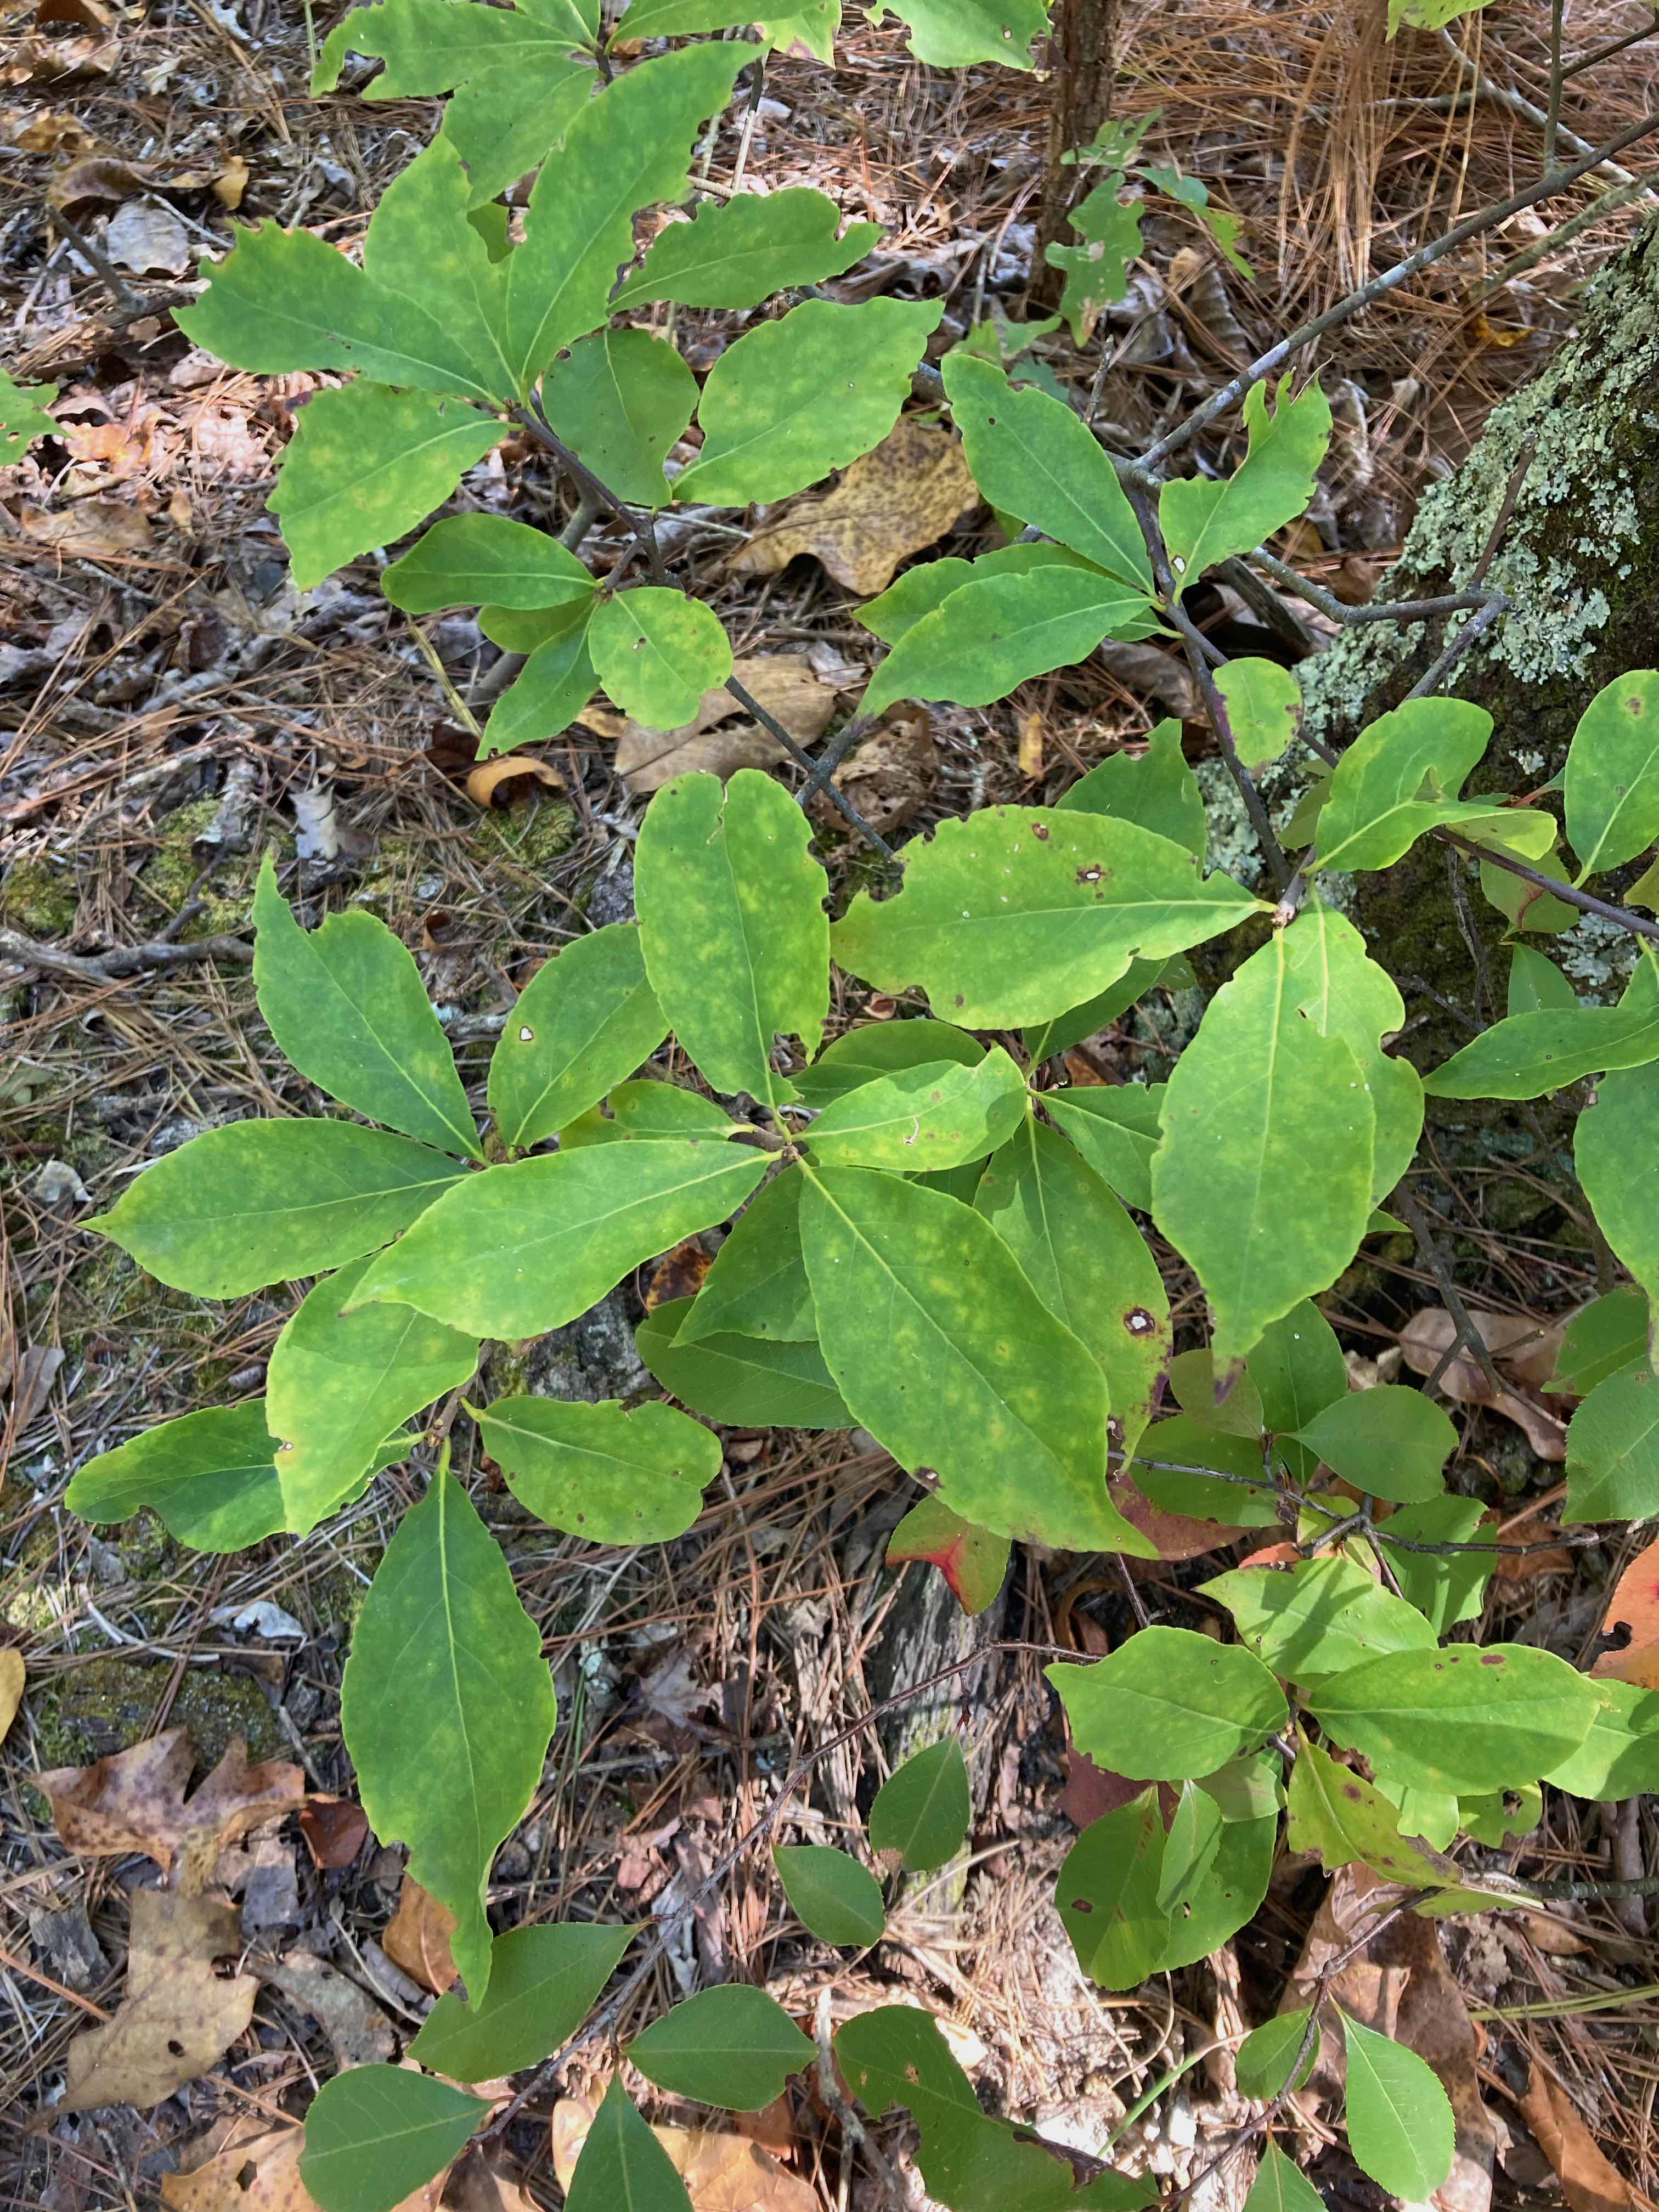 The Scientific Name is Symplocos tinctoria. You will likely hear them called Horsesugar, Common Sweetleaf. This picture shows the Leaves are alternate, thick and have entire margins. Leaf shape is obovate to oblanceolate. of Symplocos tinctoria